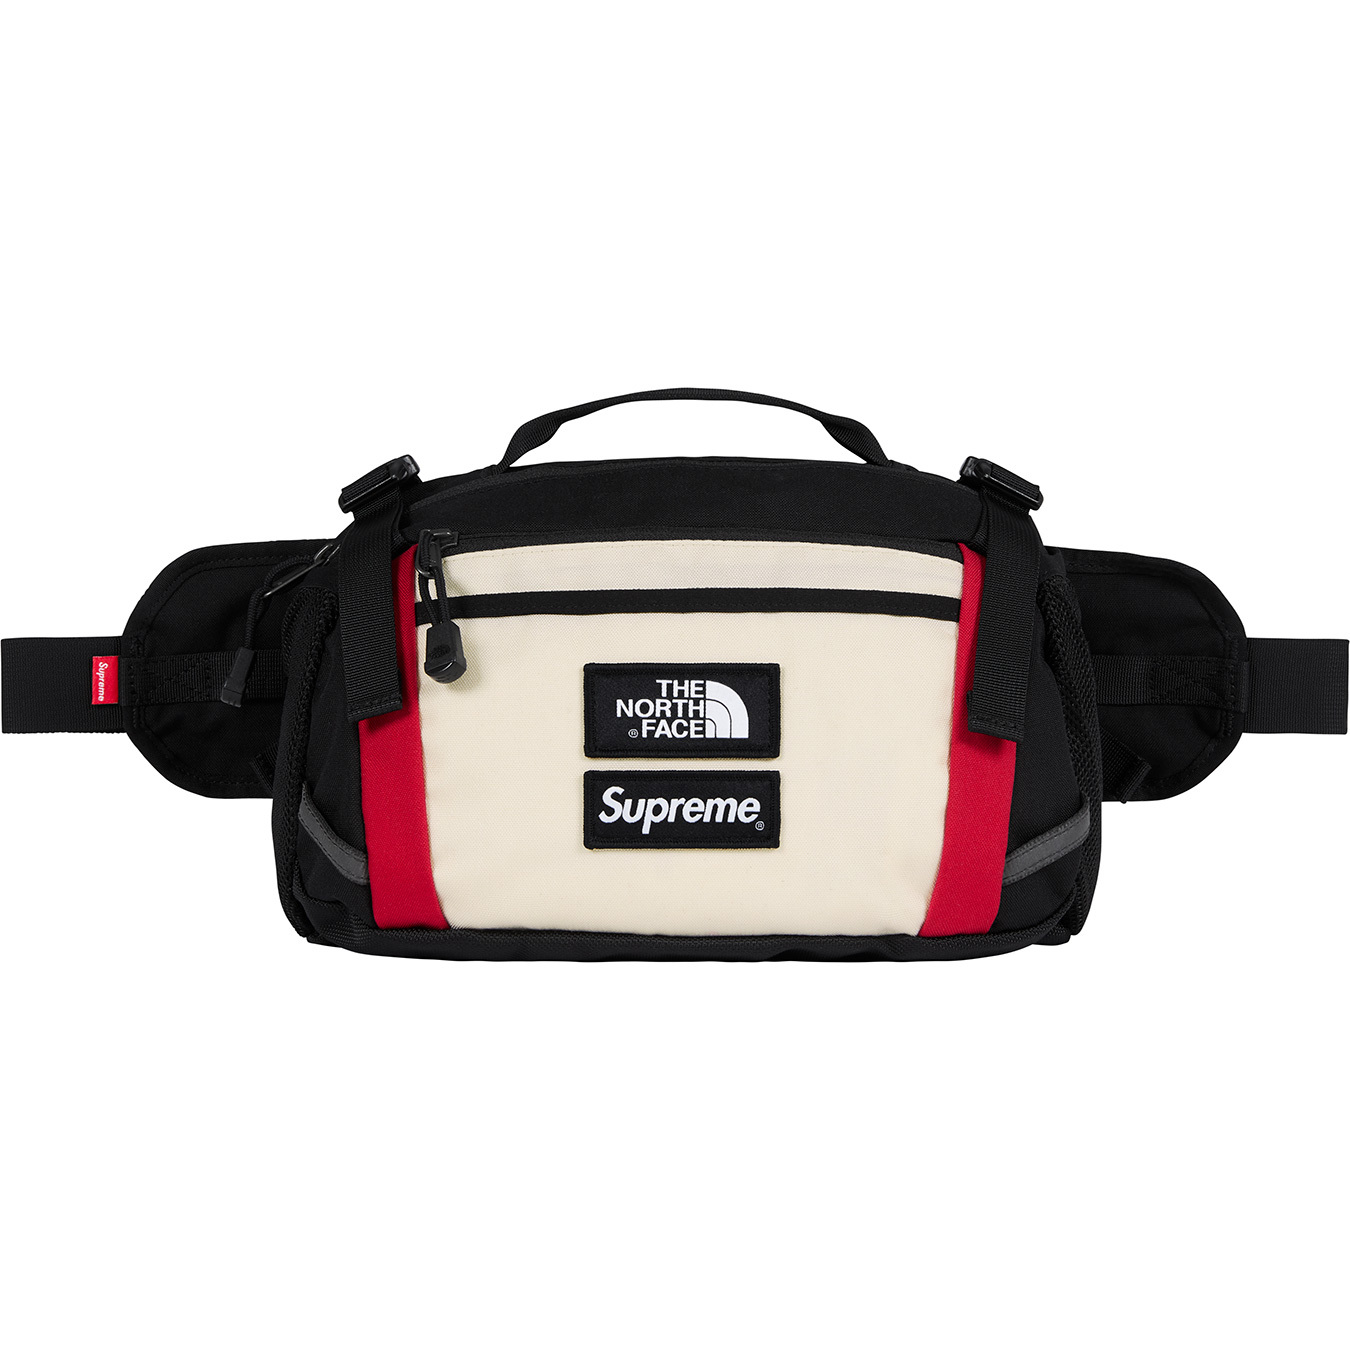 Supreme The North Face Waist Bag 18FW